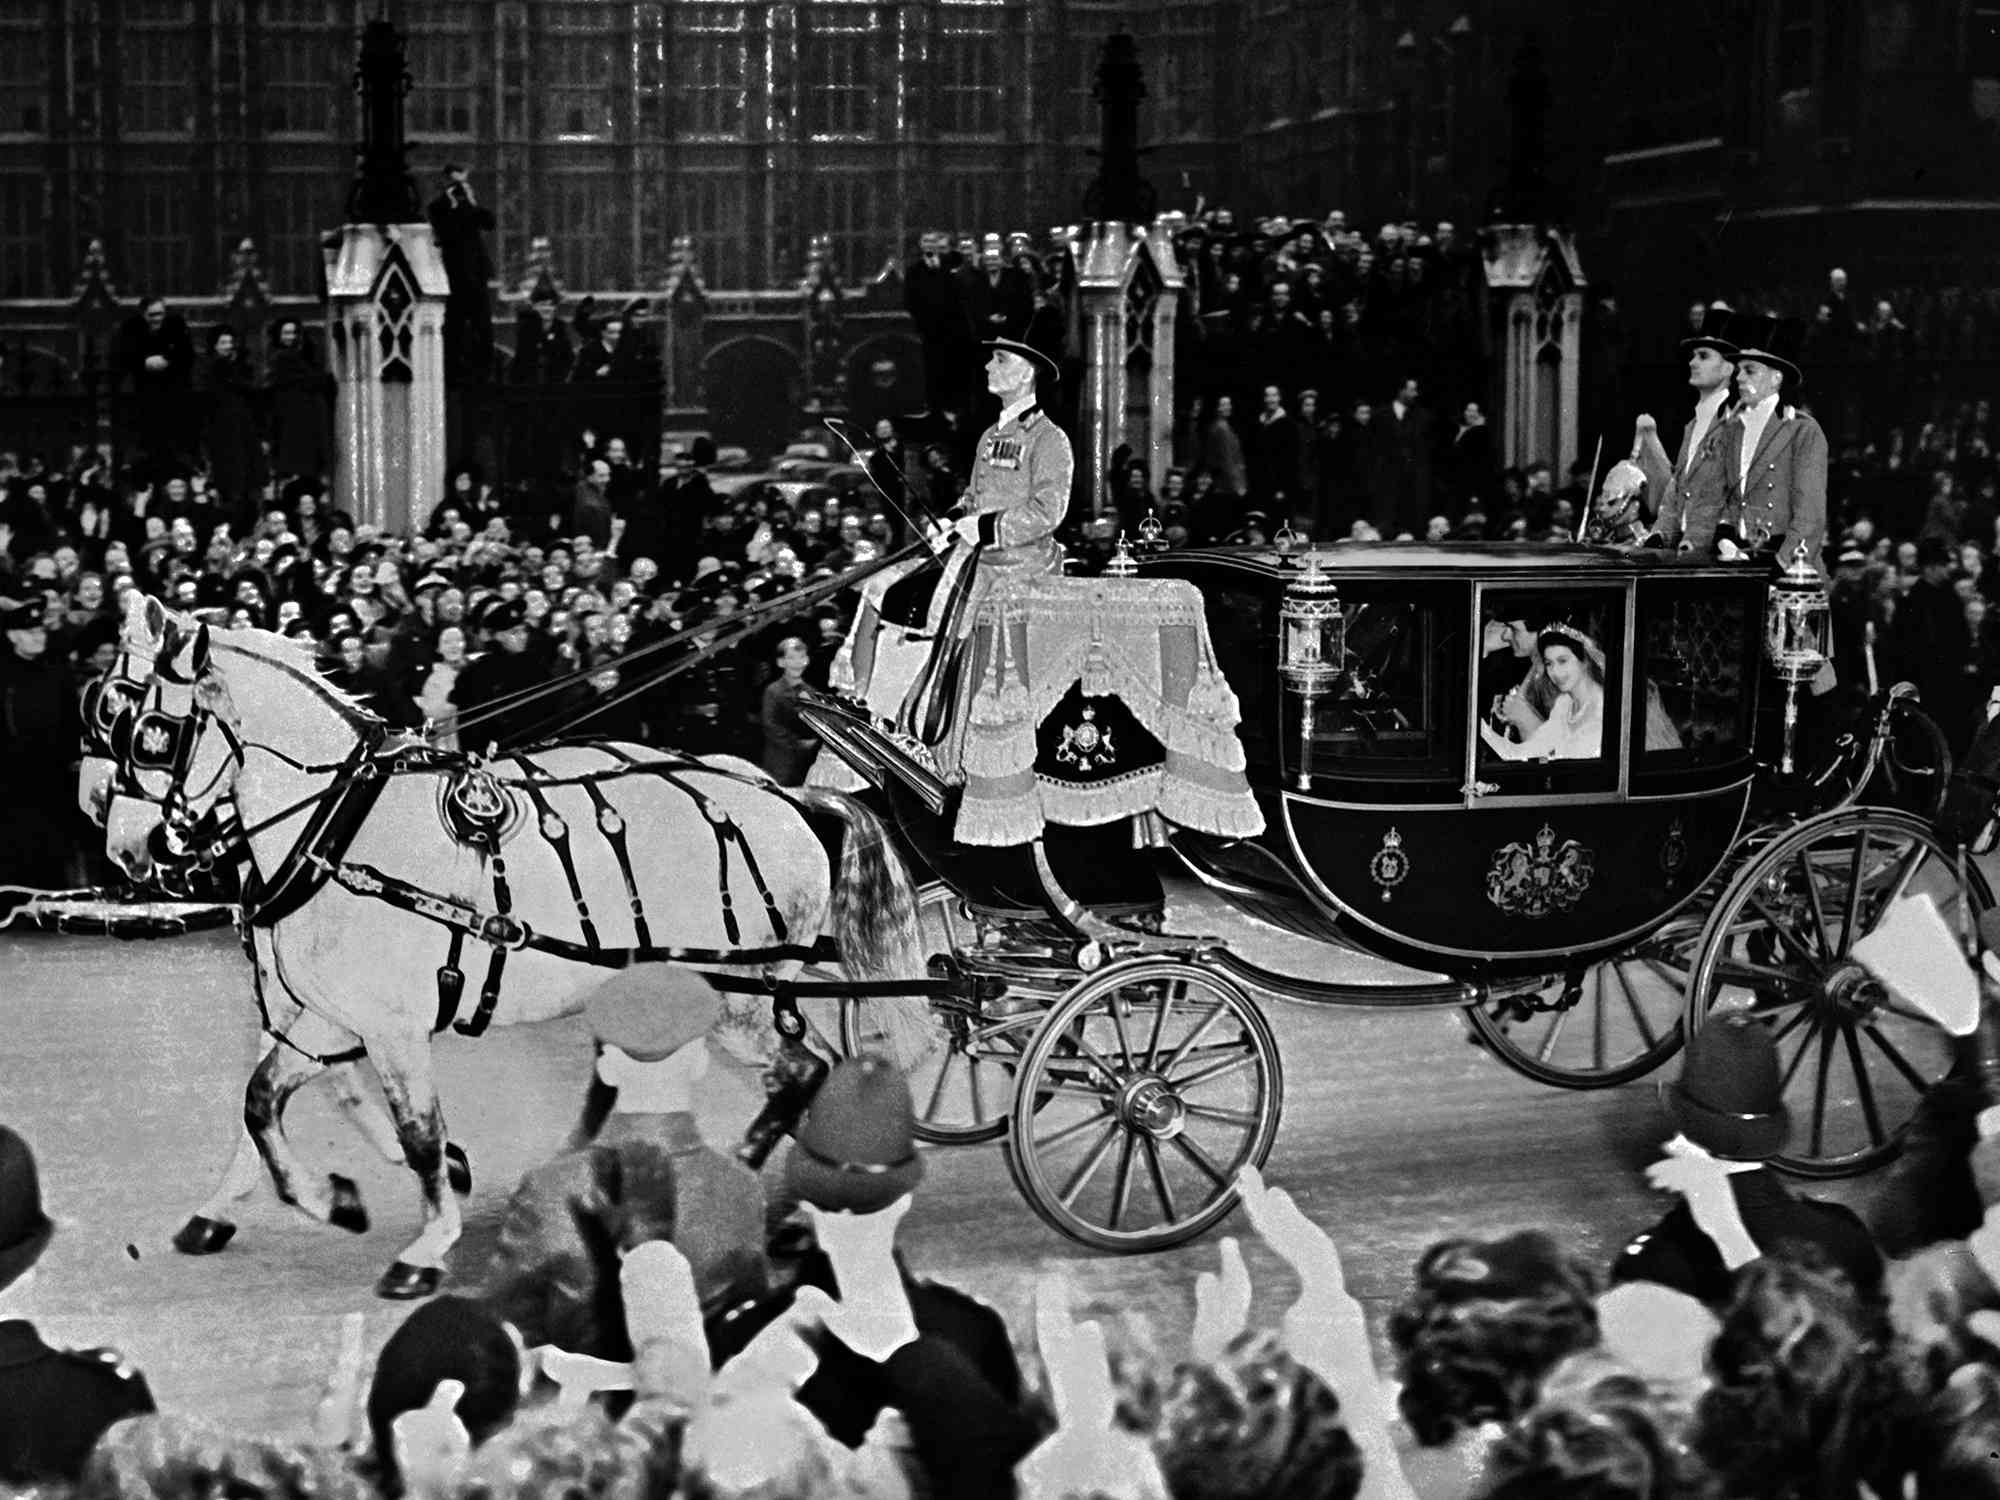 Queen Elizabeth II (in coach) and her husband Prince Philip, Duke of Edinburgh are cheered by the crowd after their wedding ceremony, on November 20, 1947, on their road to Buckingham Palace, London